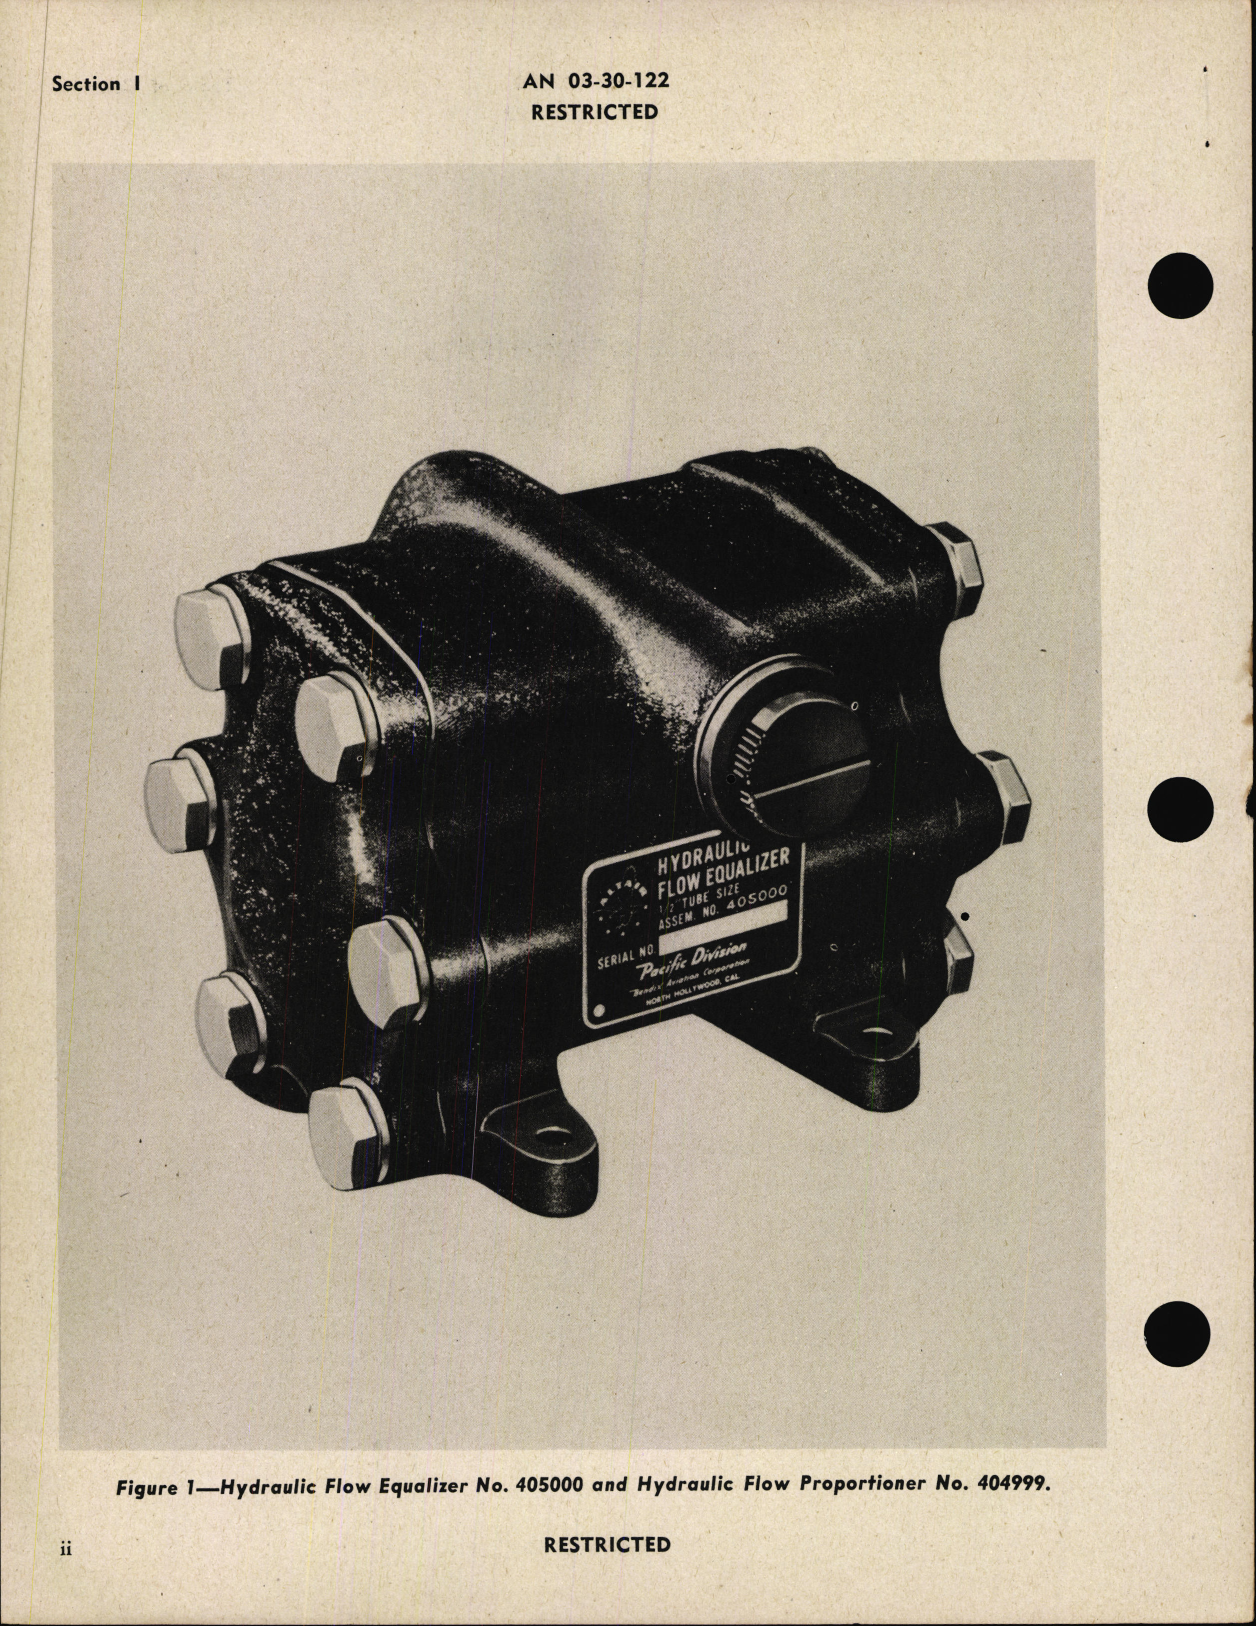 Sample page 4 from AirCorps Library document: Handbook of Overhaul Instructions with Parts Catalog for Hydraulic Flow Equalizer and Proportioner